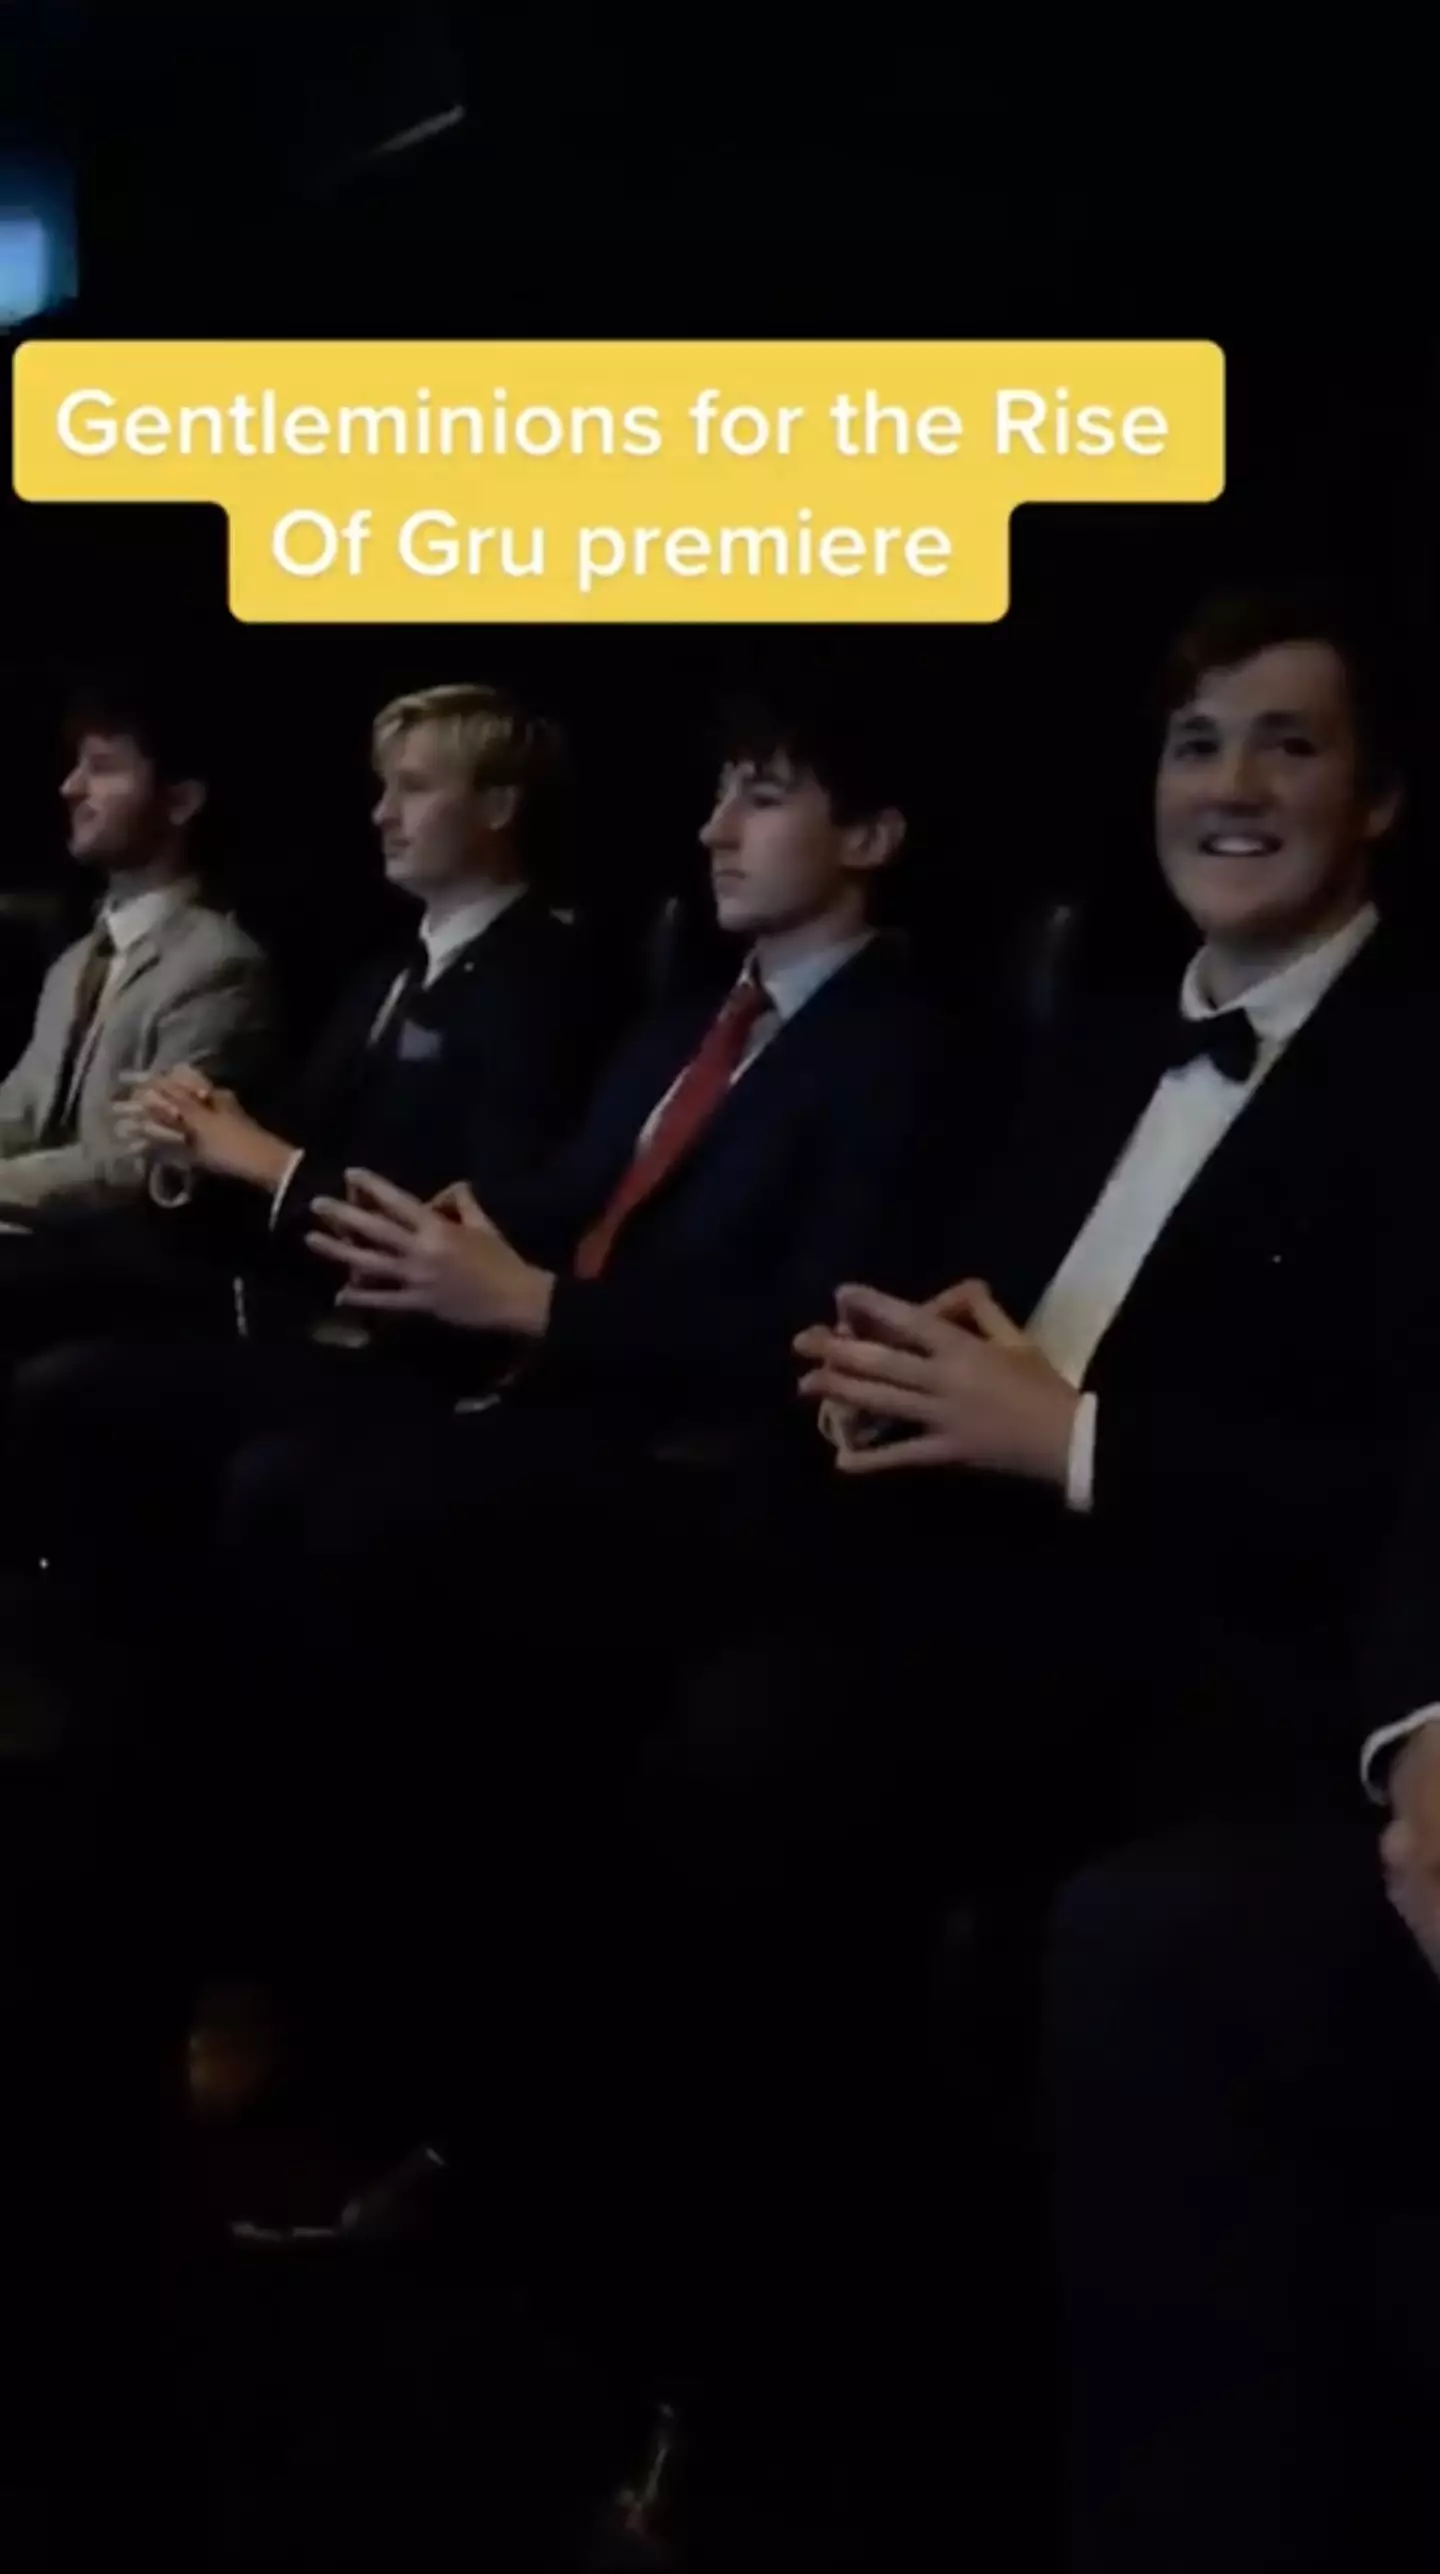 ‘Gentleminions’ have been dressing up in suits to watch Minions at the cinema.